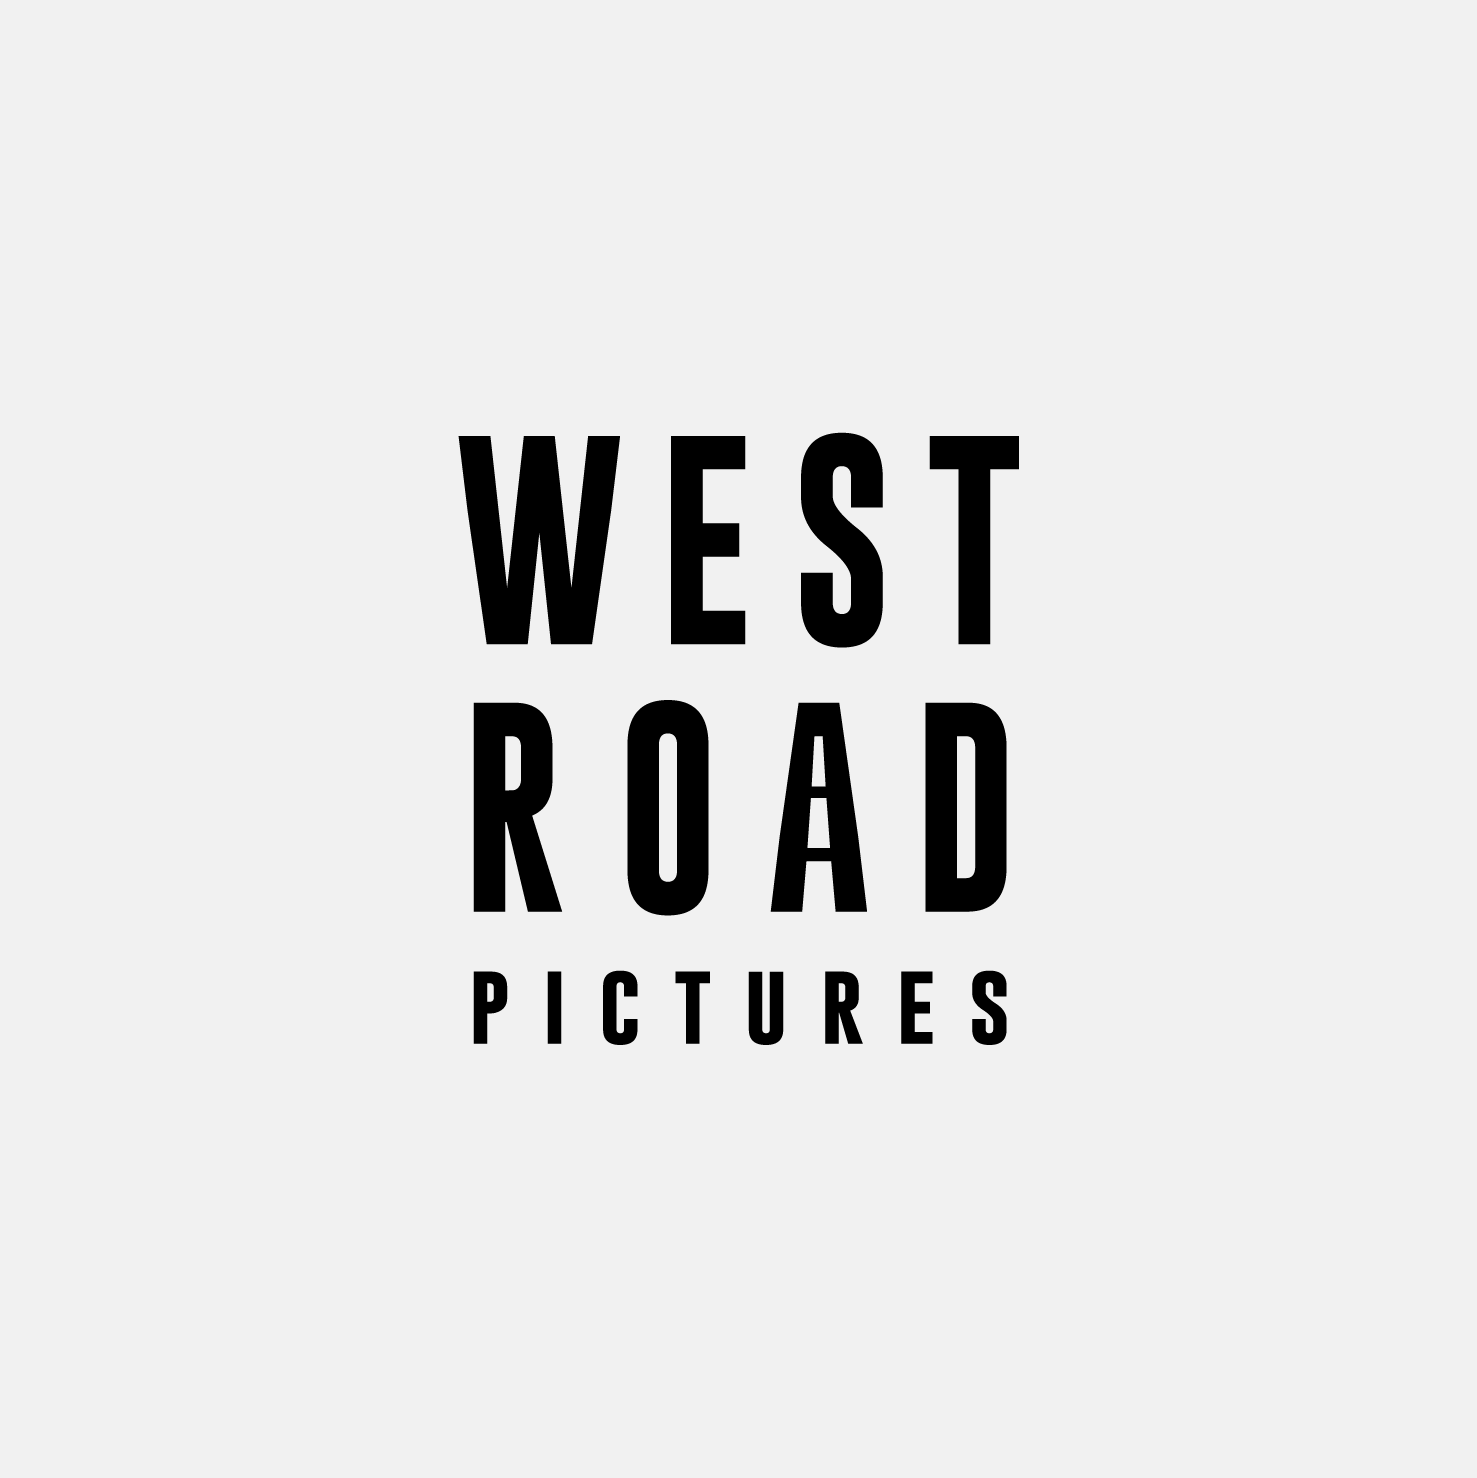 WEST ROAD PICTURES LOGOS-03.png